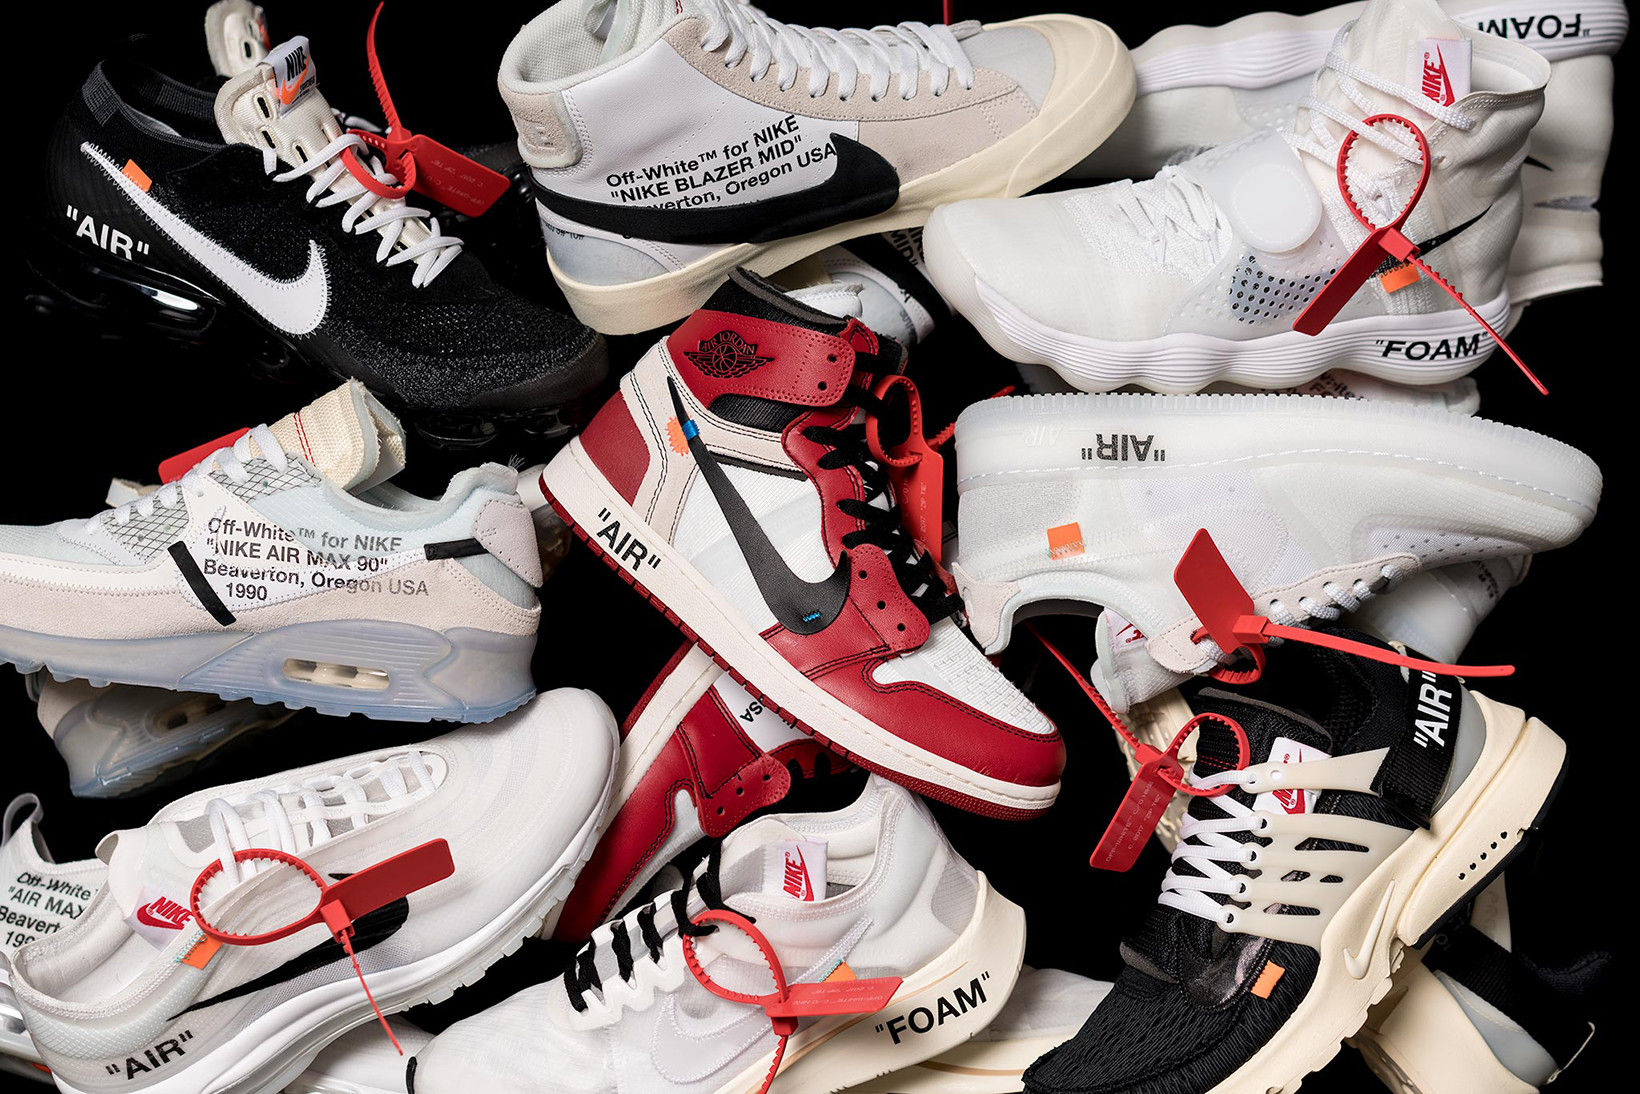 5 celebrity sneaker collaborations worth breaking the bank for